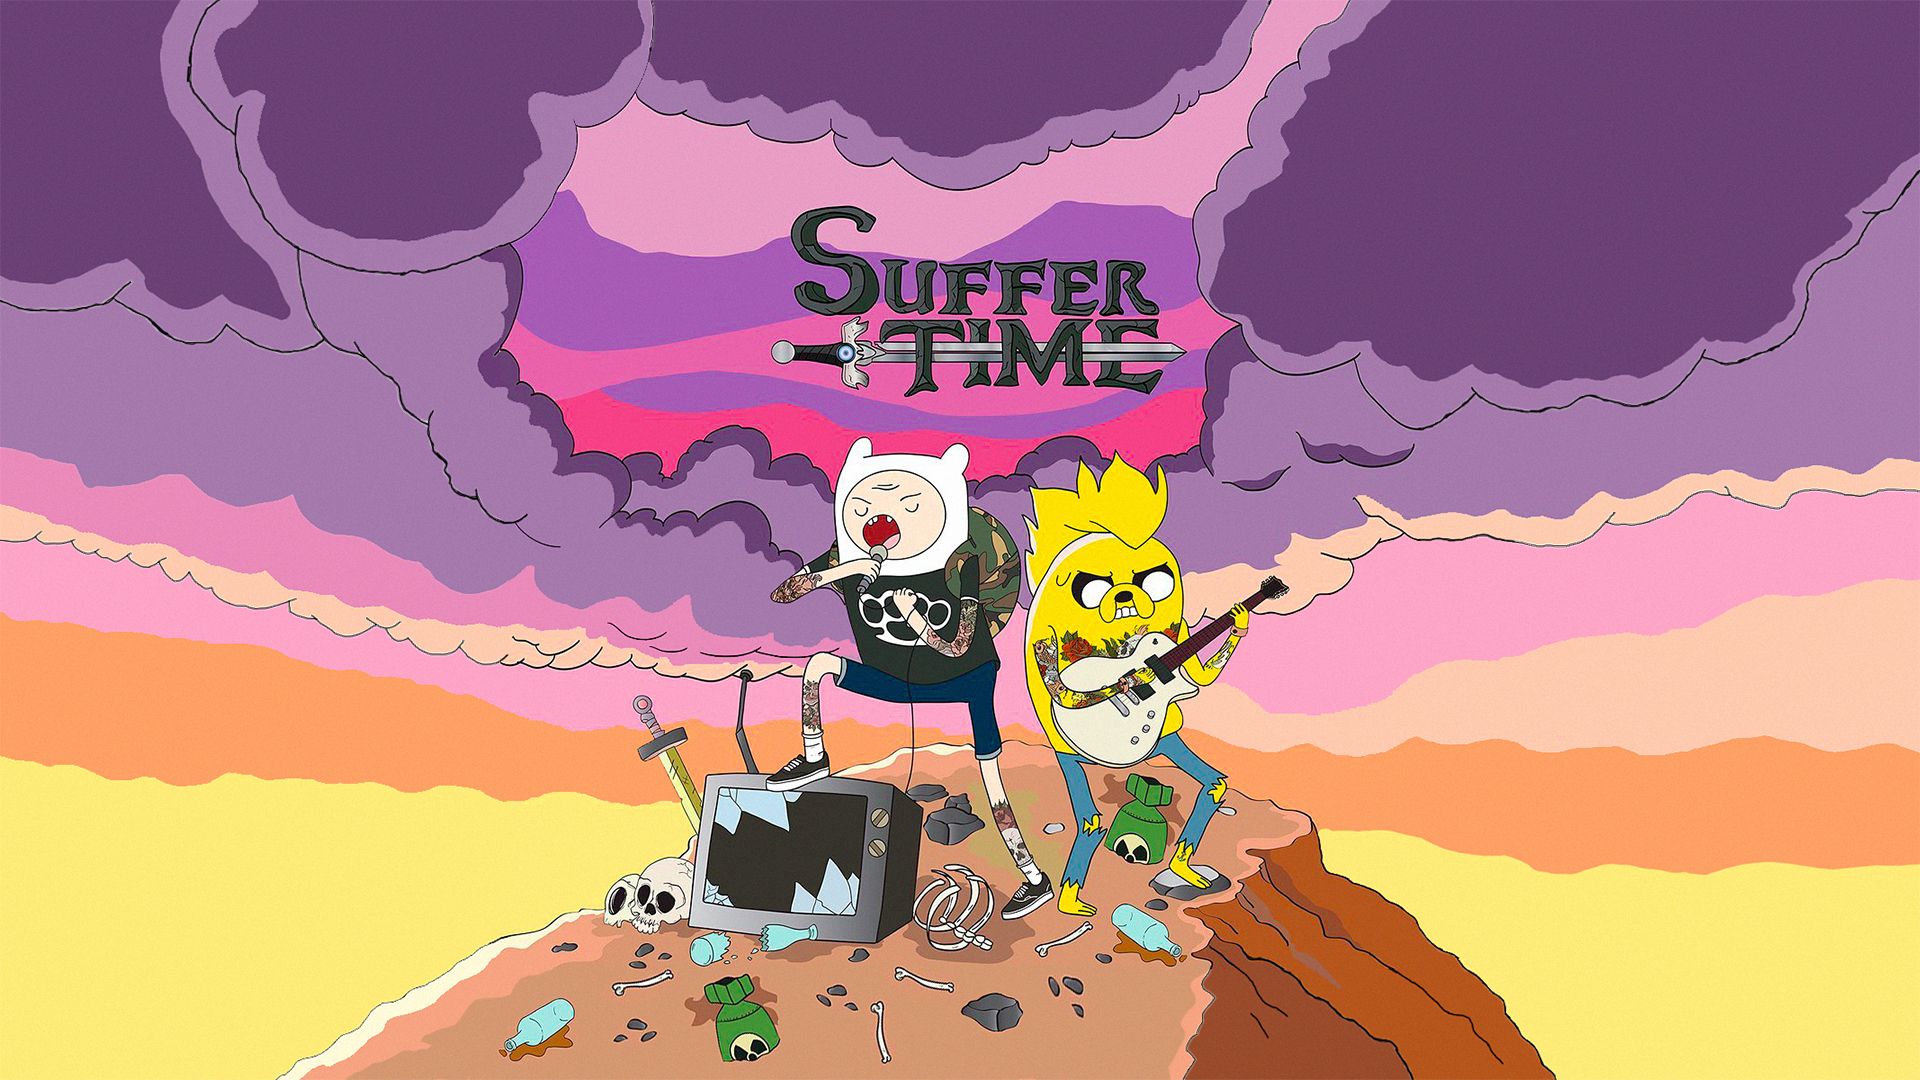 Aesthetic Adventure Time Wallpapers  Wallpaper Cave